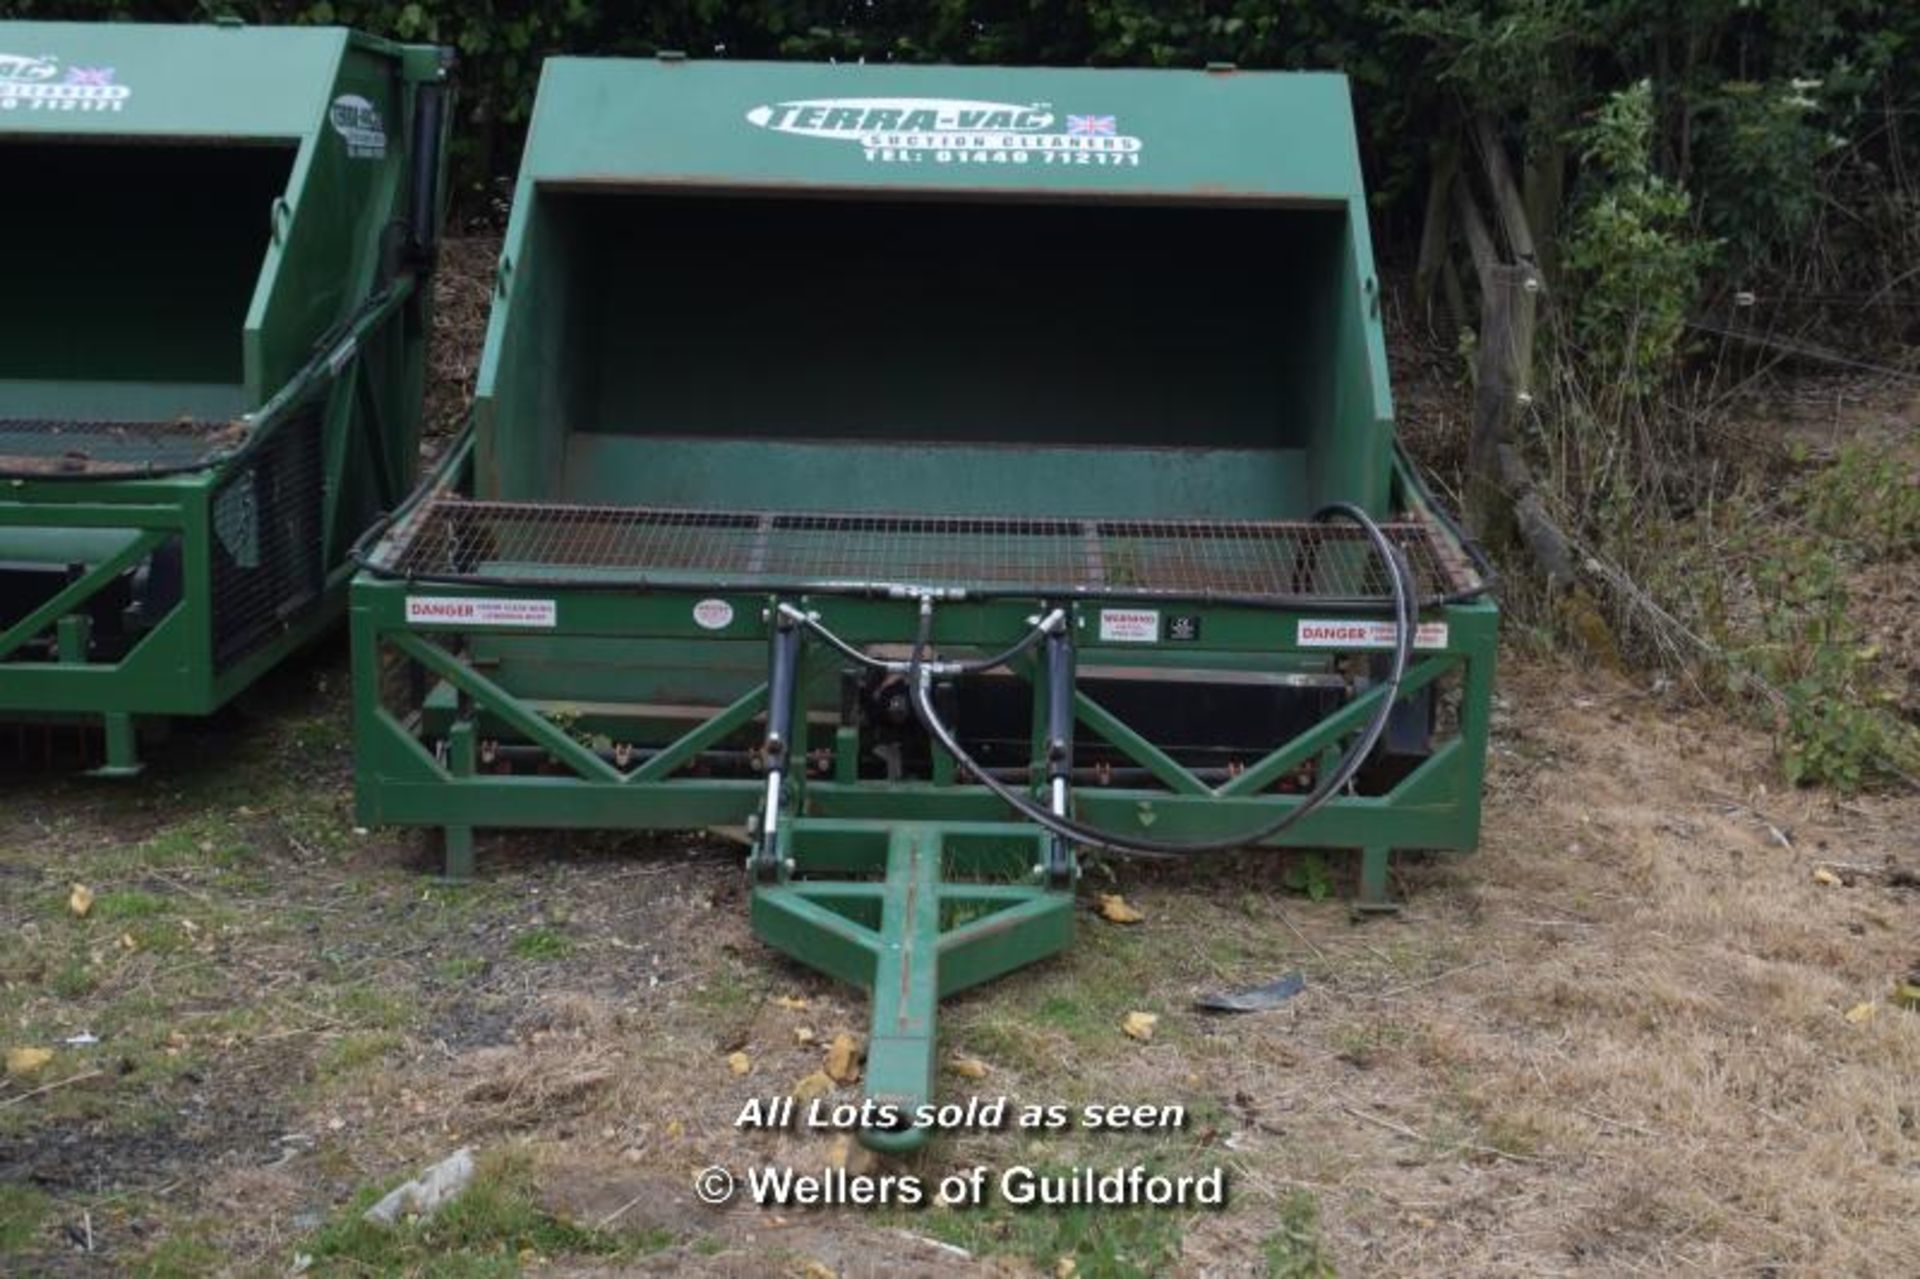 TERRA-VAC HYDRAULIC HORSE POO SWEEPER - IN FULL WORKING ORDER, VERY GOOD CONDITION, ONE OWNER